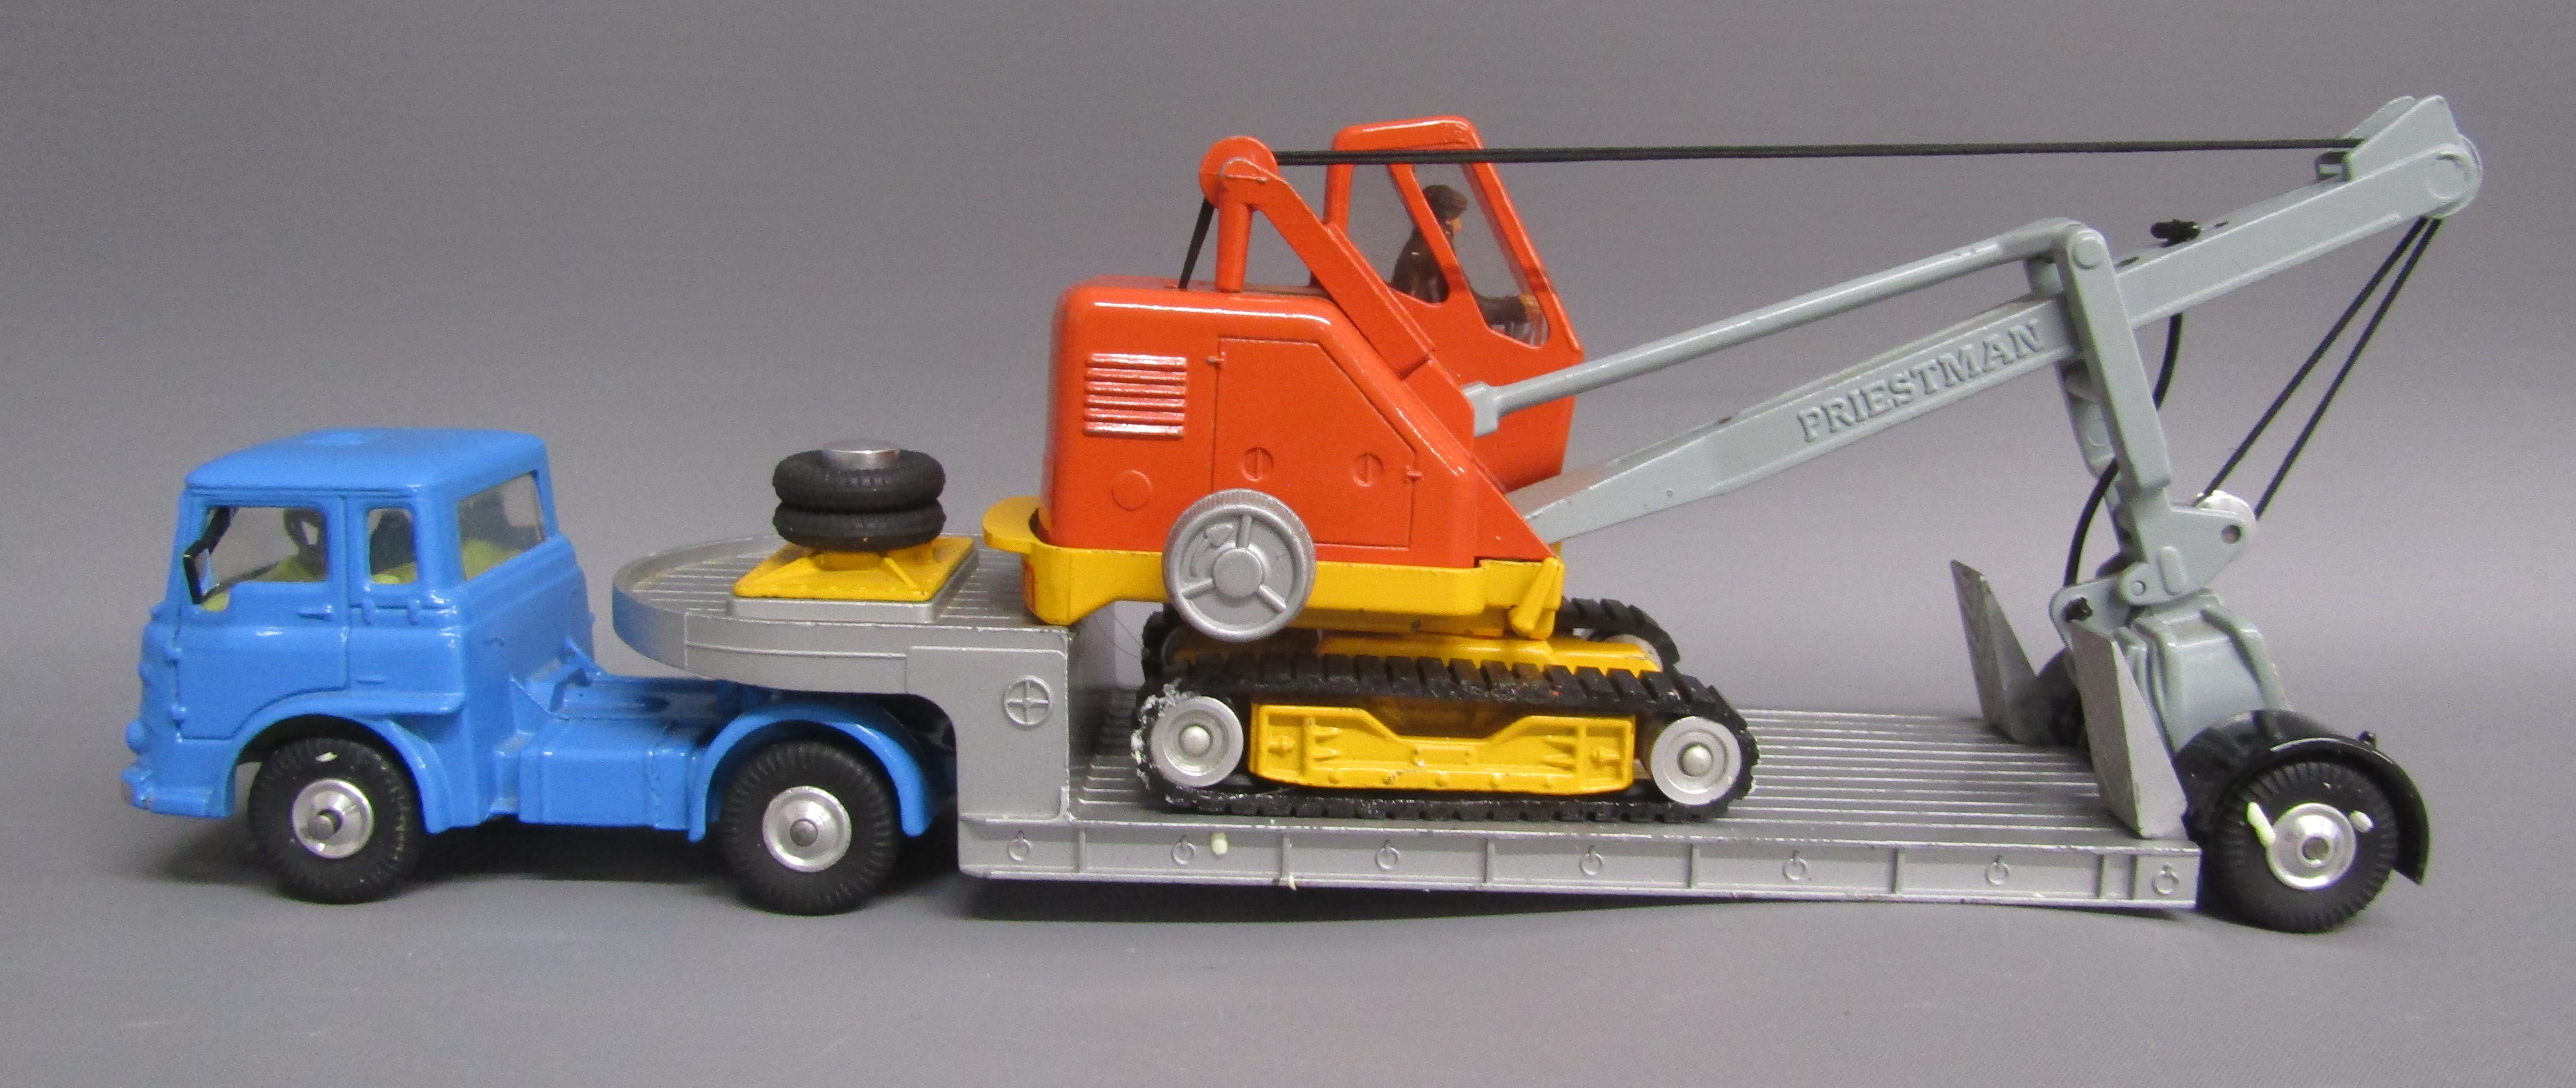 Boxed Corgi Major No 27 Machinery Carrier with Bedford tractor unit and Priestman 'Cub' shovel - Bild 3 aus 8